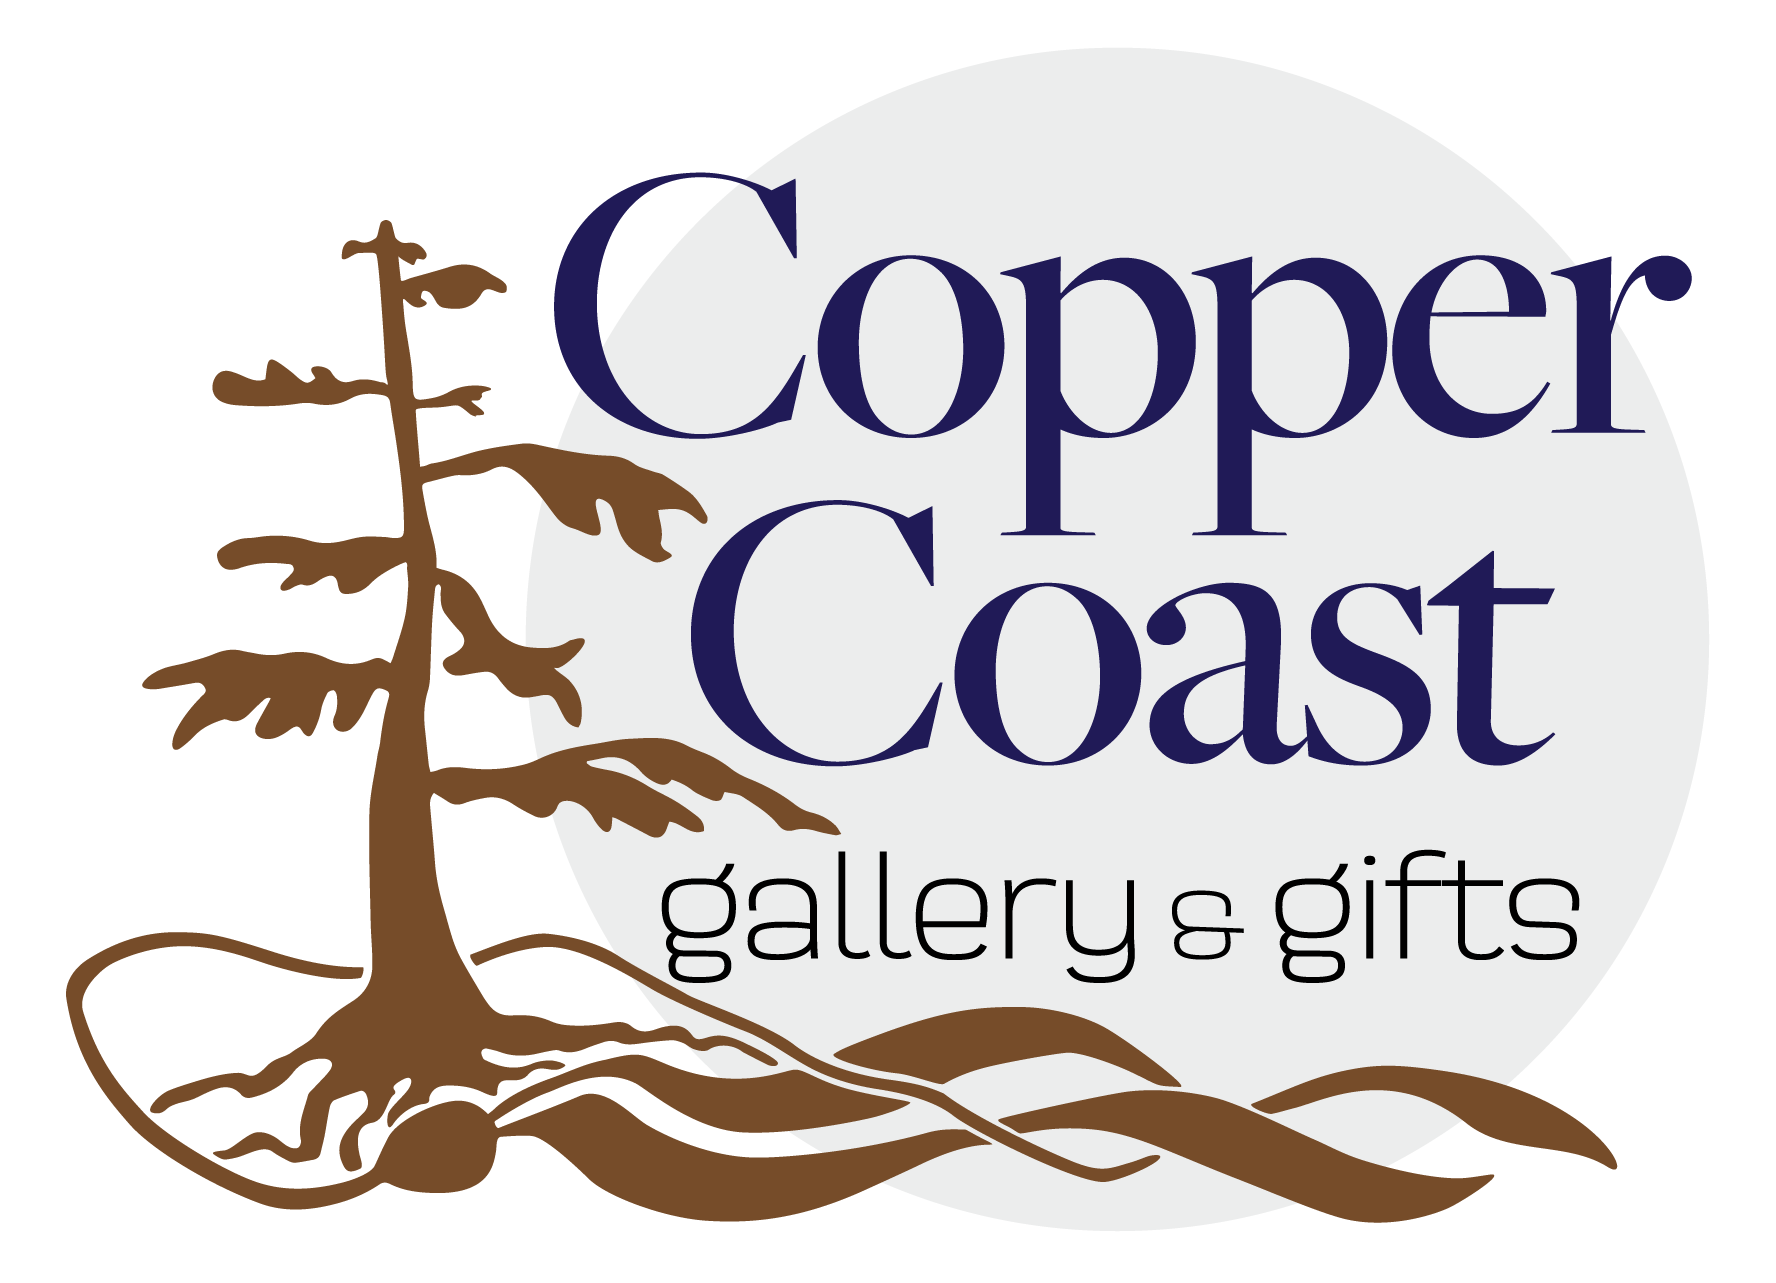 Copper Coast Gallery & Gifts